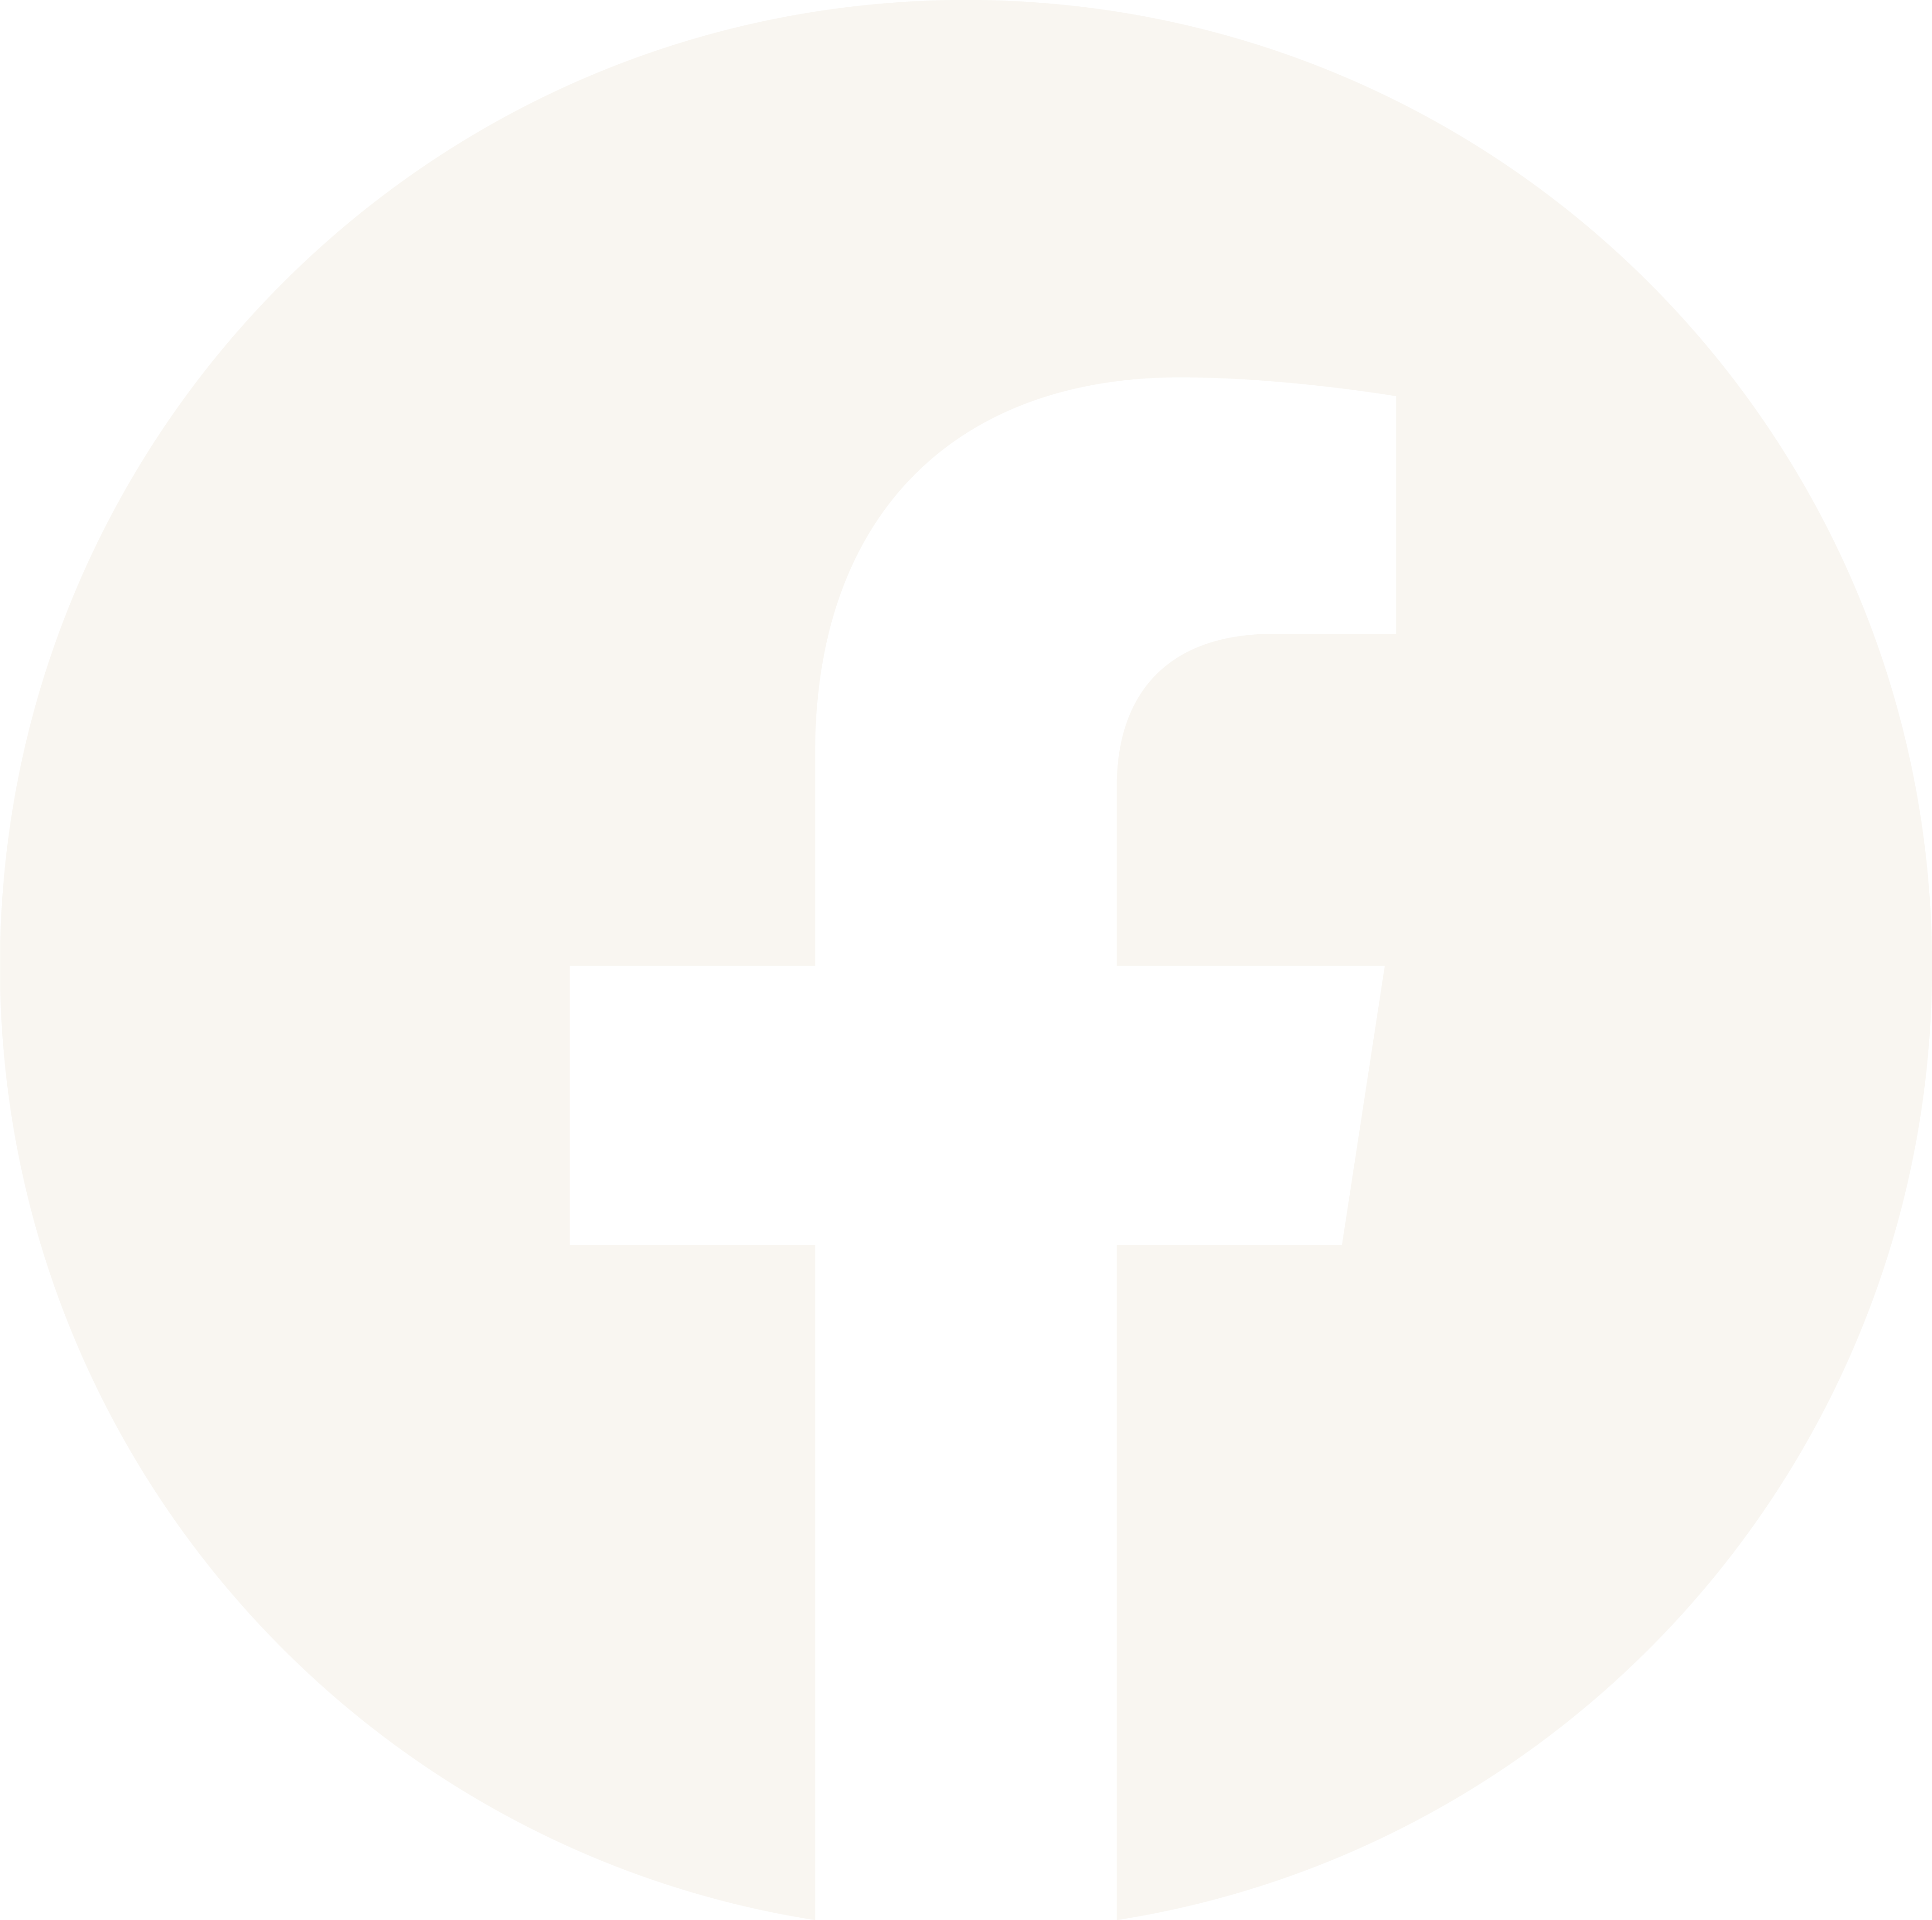 Facebook logo, circle with a lowercase f in white